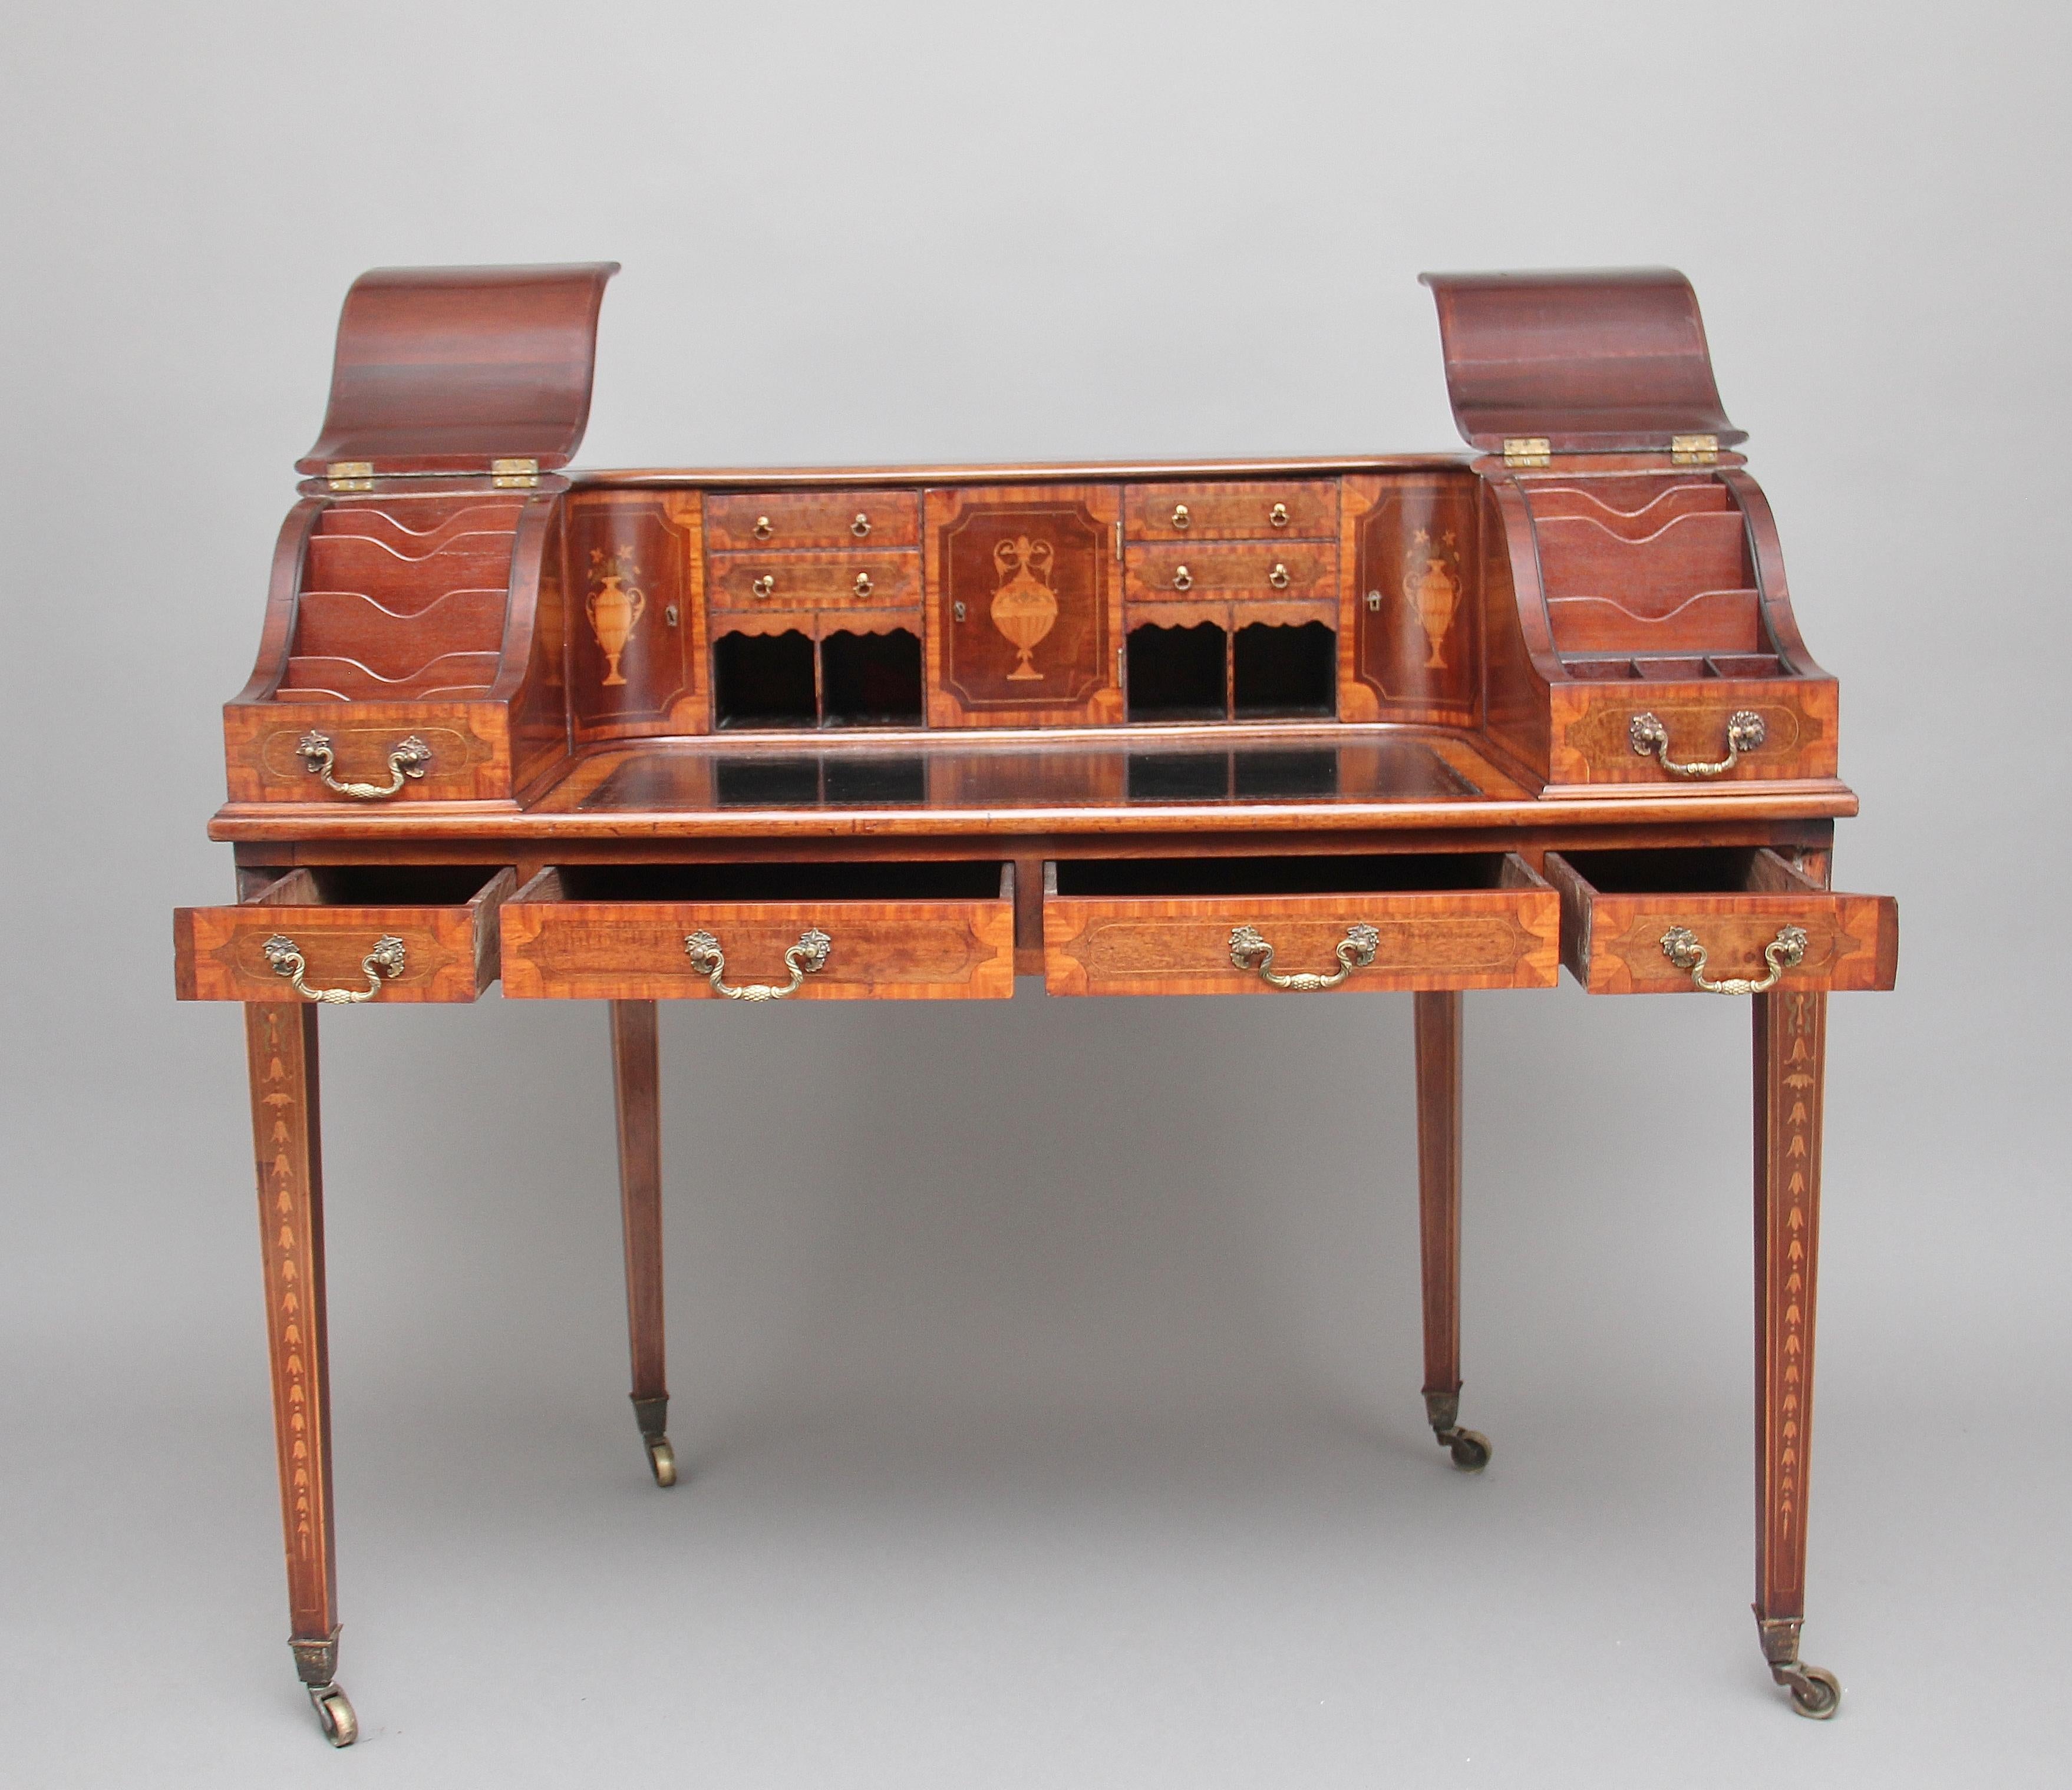 A fabulous quality early 20th century mahogany Carlton house desk on four square tapered legs ending on brass castors, the legs inlaid with boxwood lines, on the front legs there is also an inlaid garland with a string of bell flowers, above this